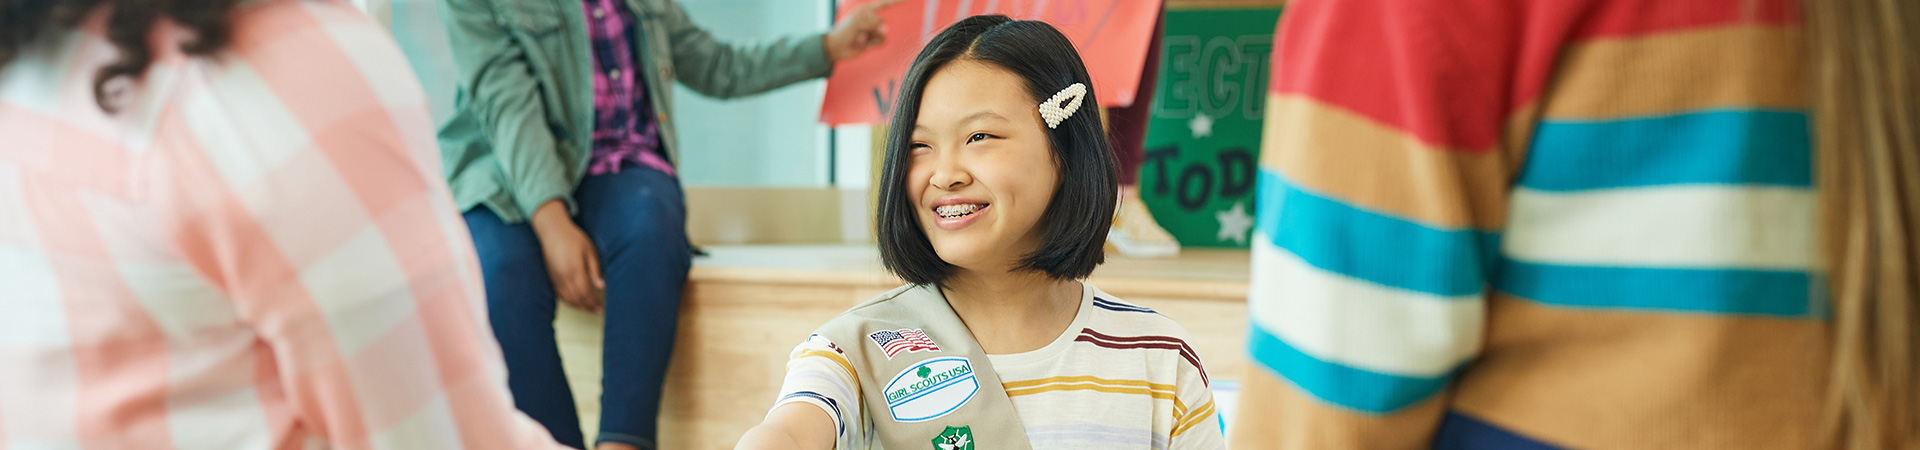  cadette girl scout hosting a table and smiling at a civics event with other middle school and high school girls  